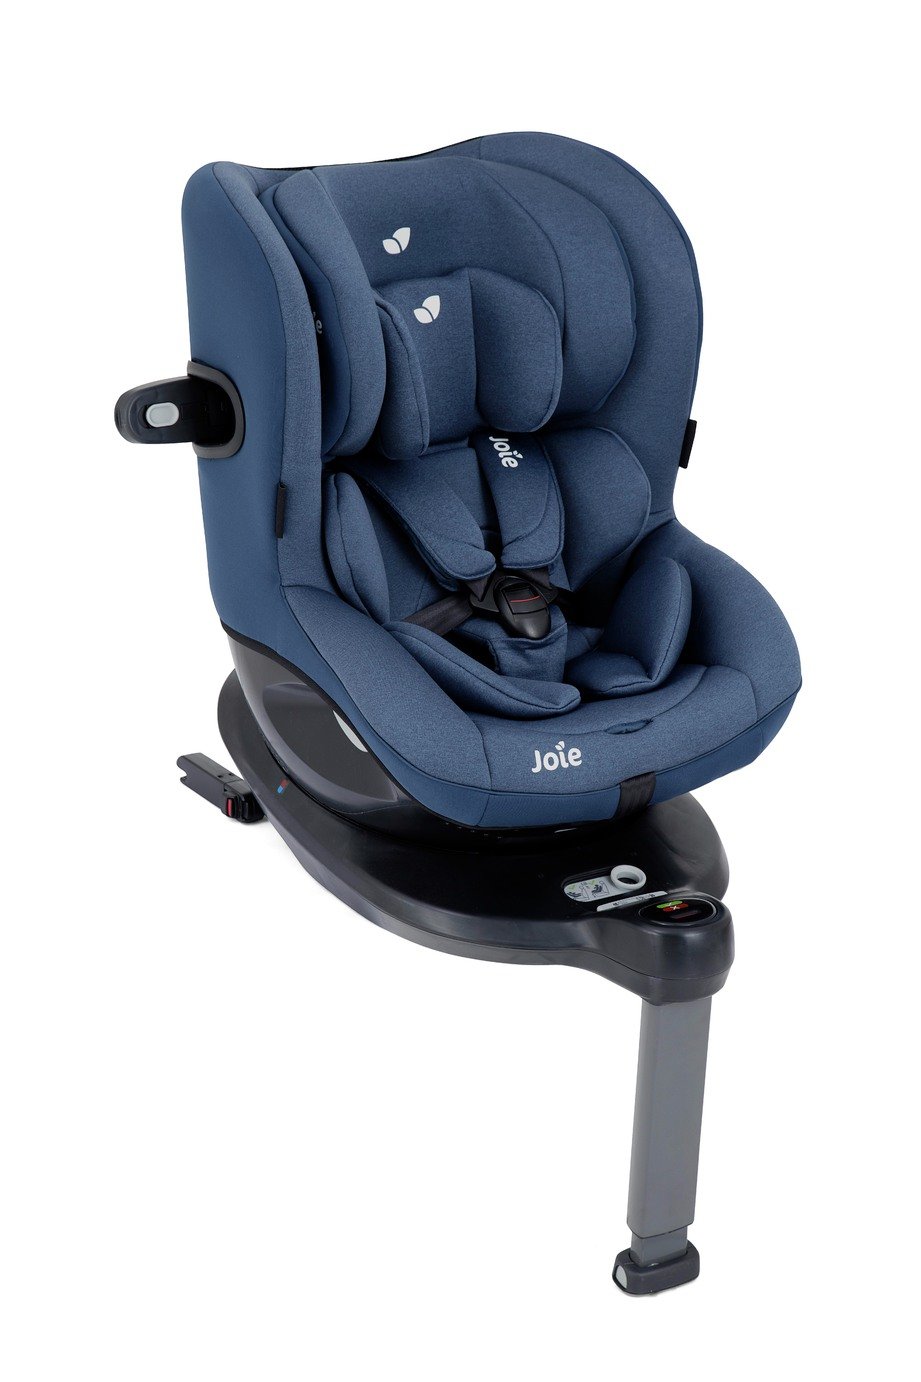 Joie i-Spin 360 Group 0+/1 Car Seat - Deep Sea